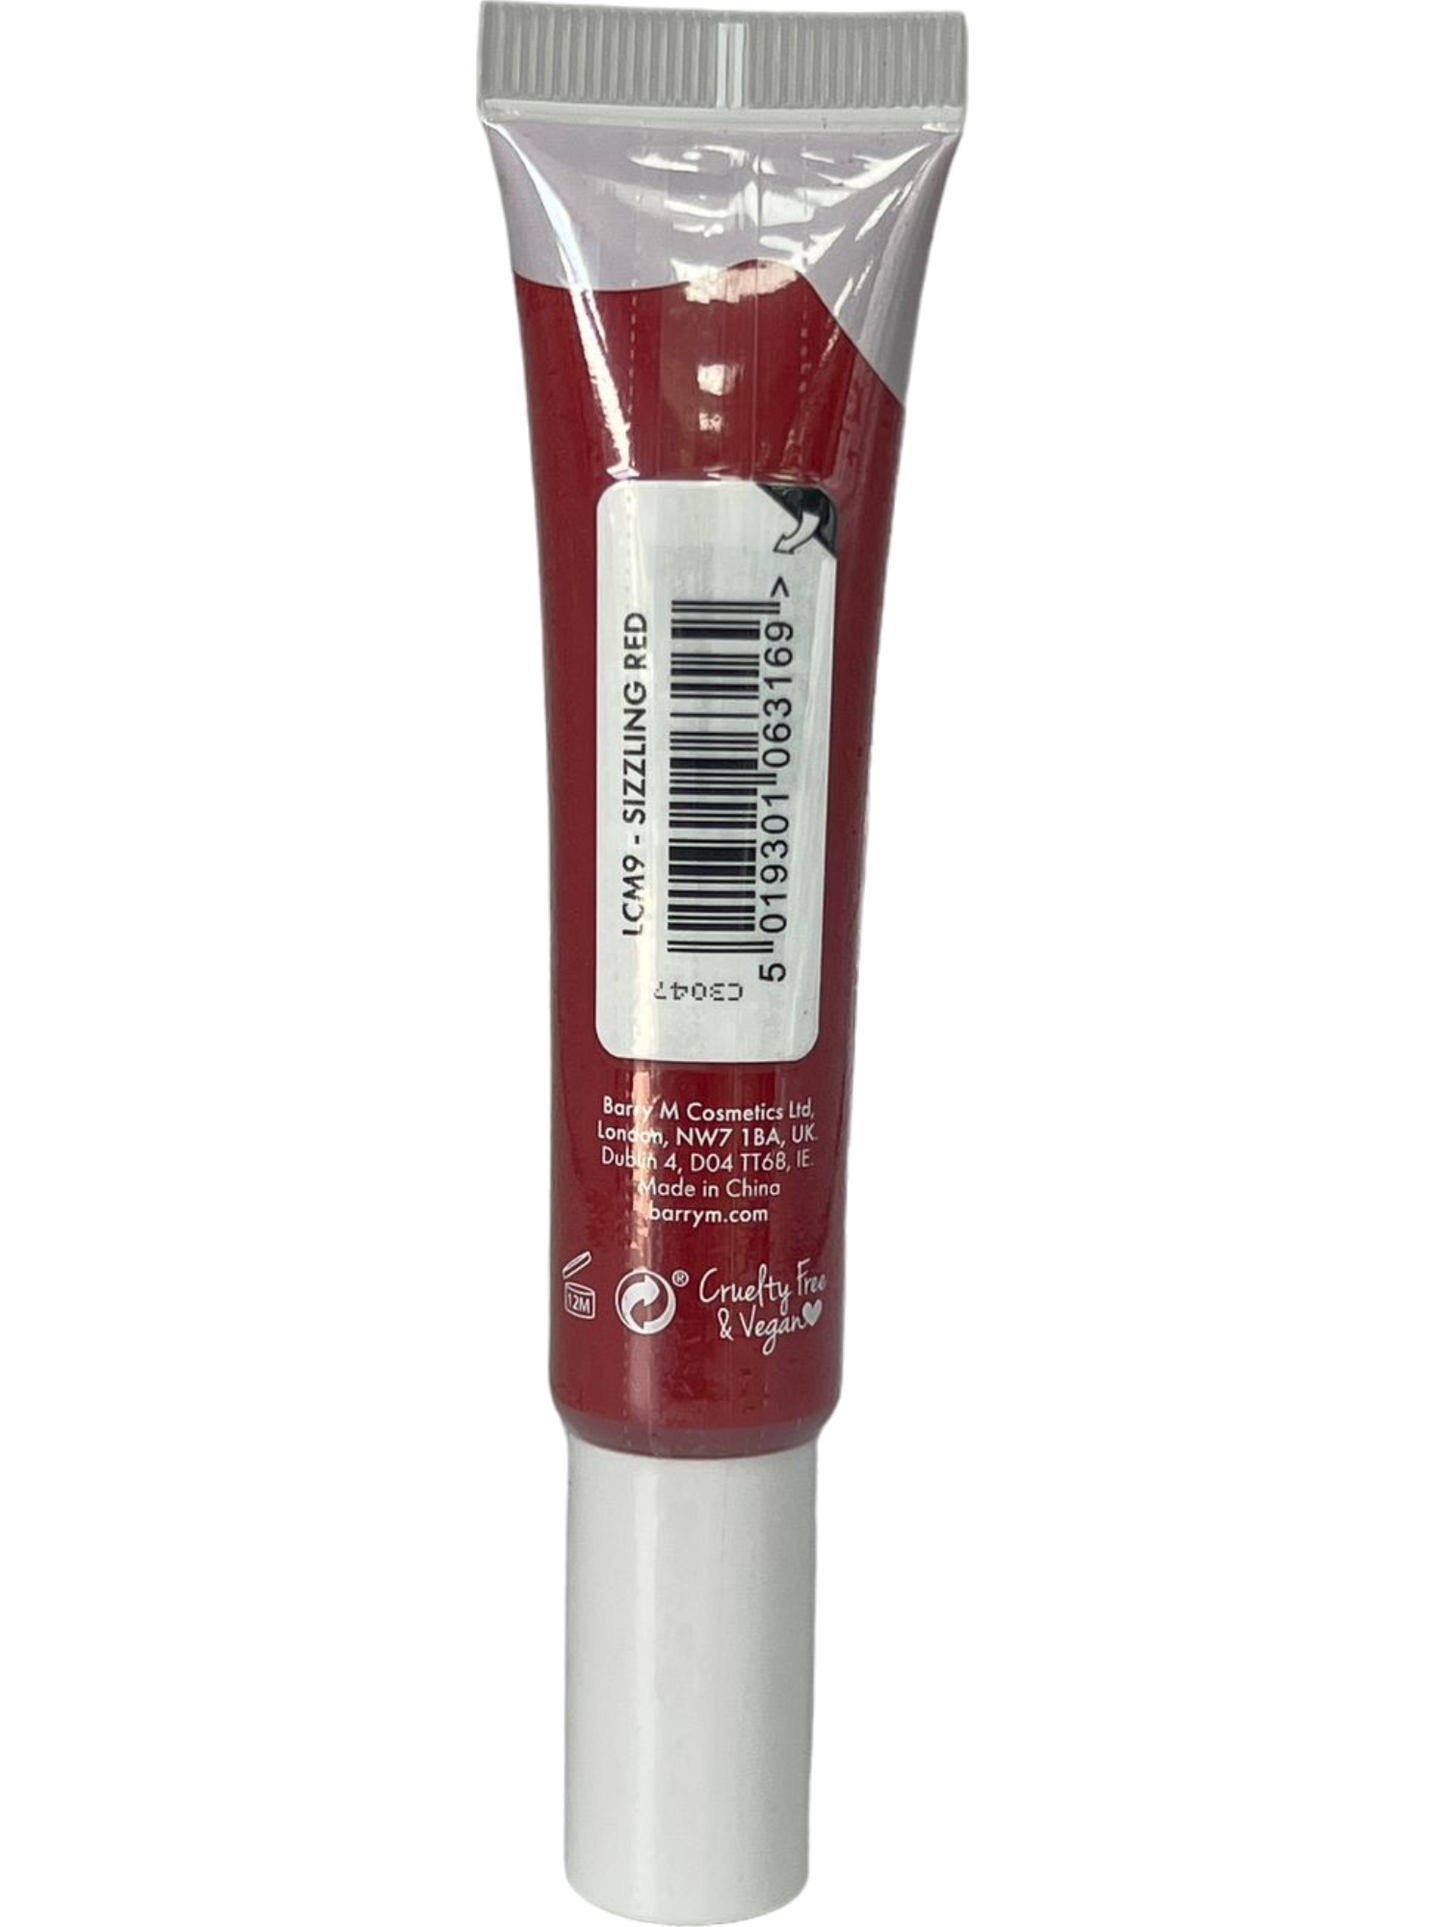 Barry M Matte Glide on Lip Creme Sizzling Red